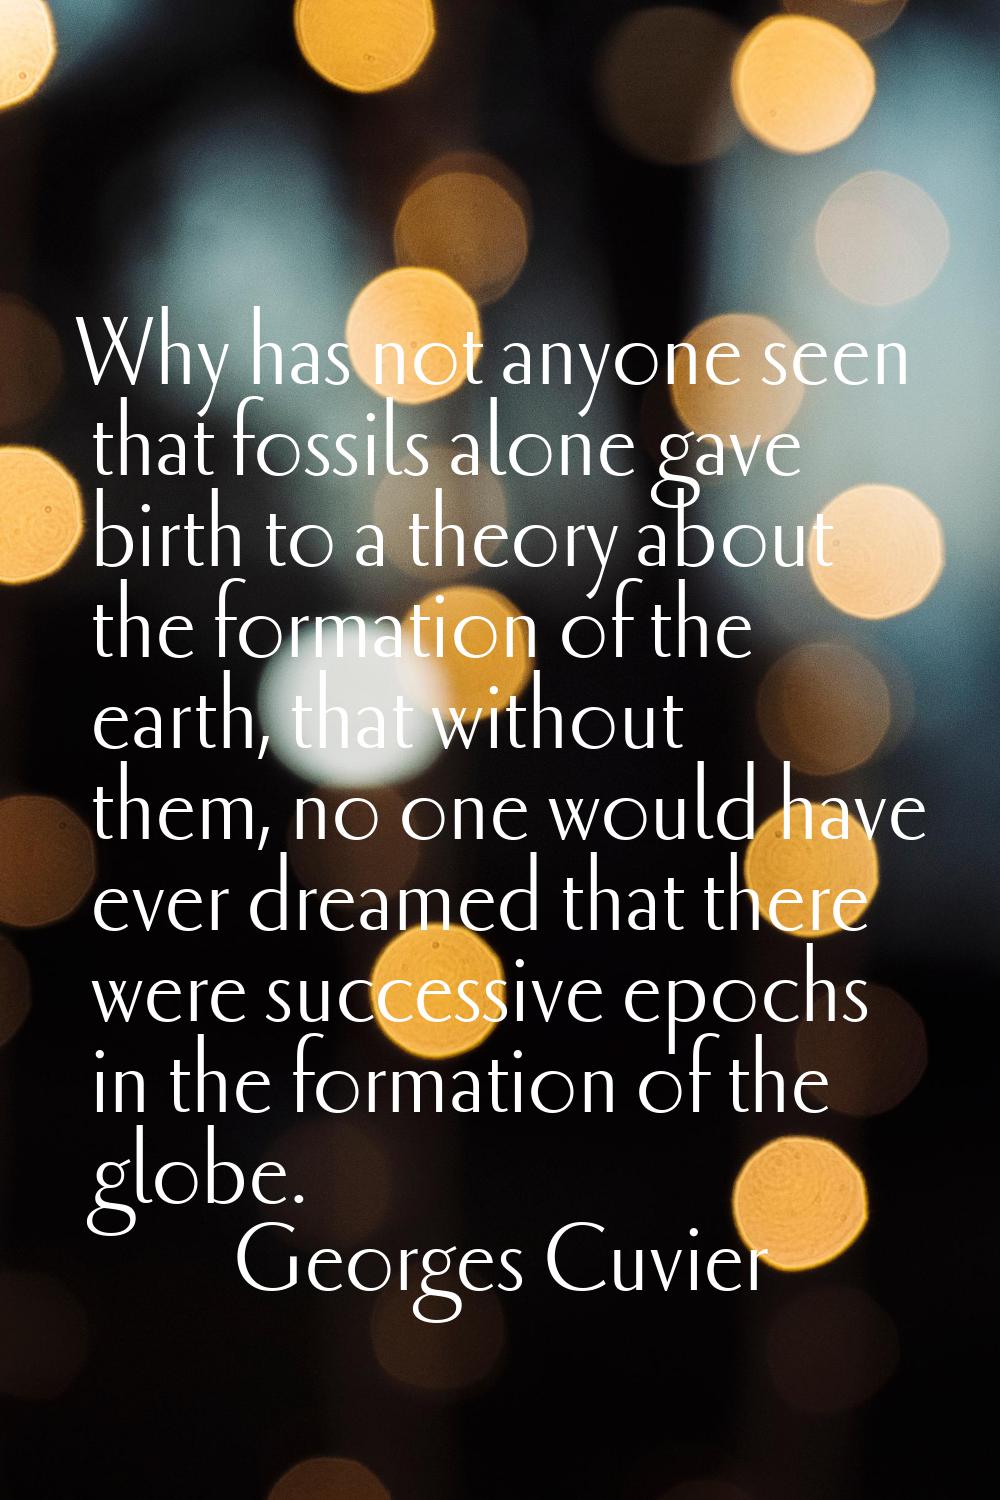 Why has not anyone seen that fossils alone gave birth to a theory about the formation of the earth,